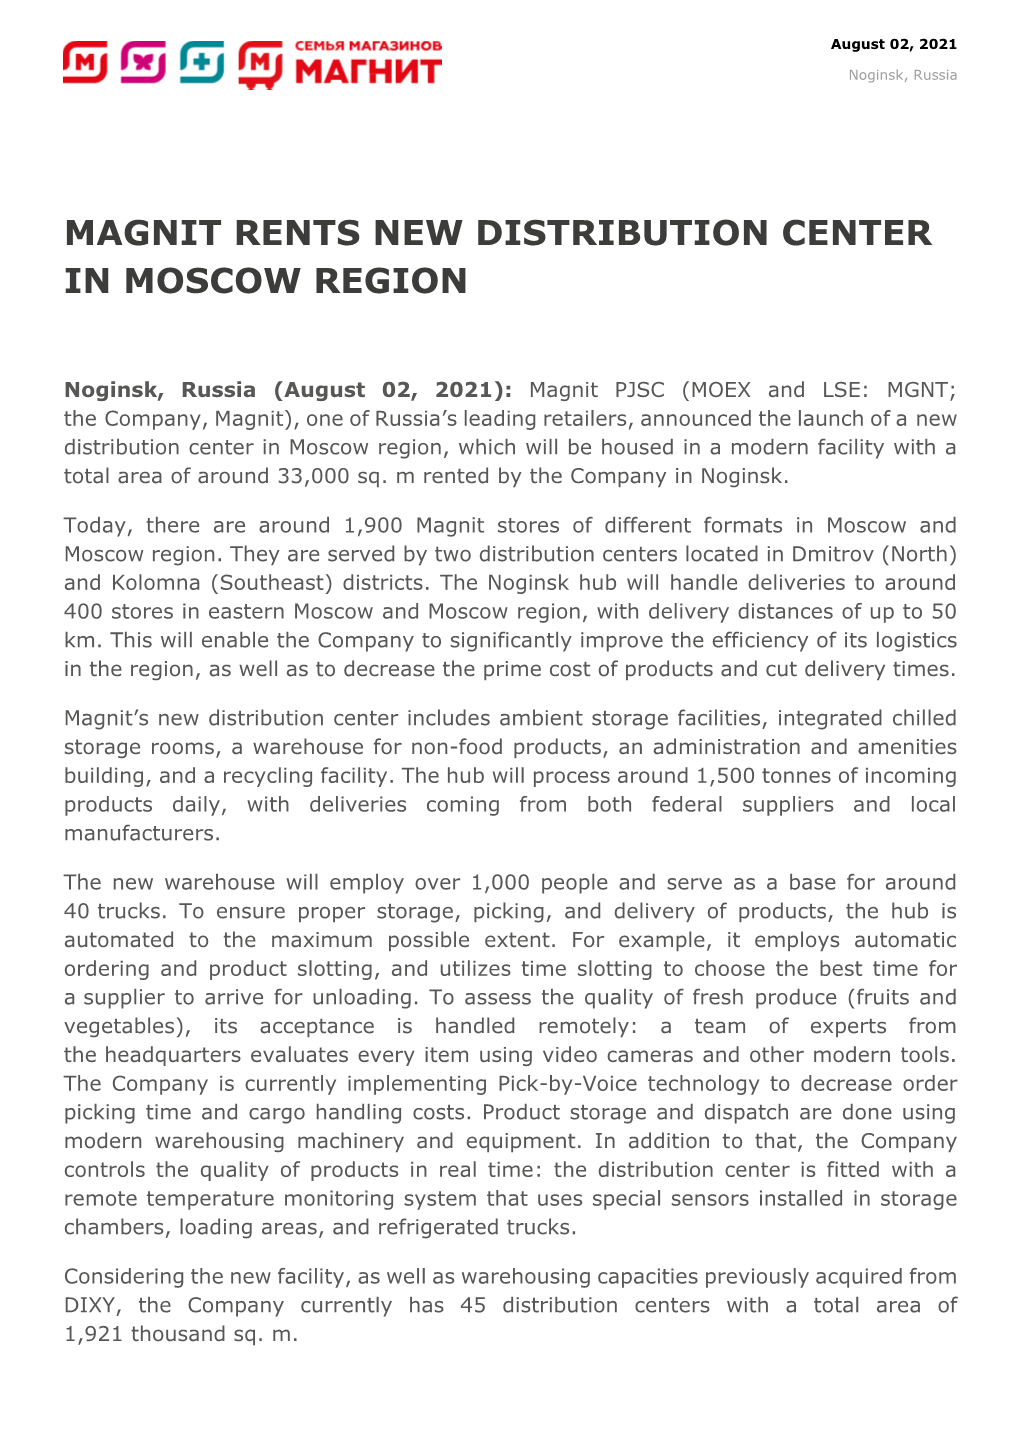 Magnit Rents New Distribution Center in Moscow Region